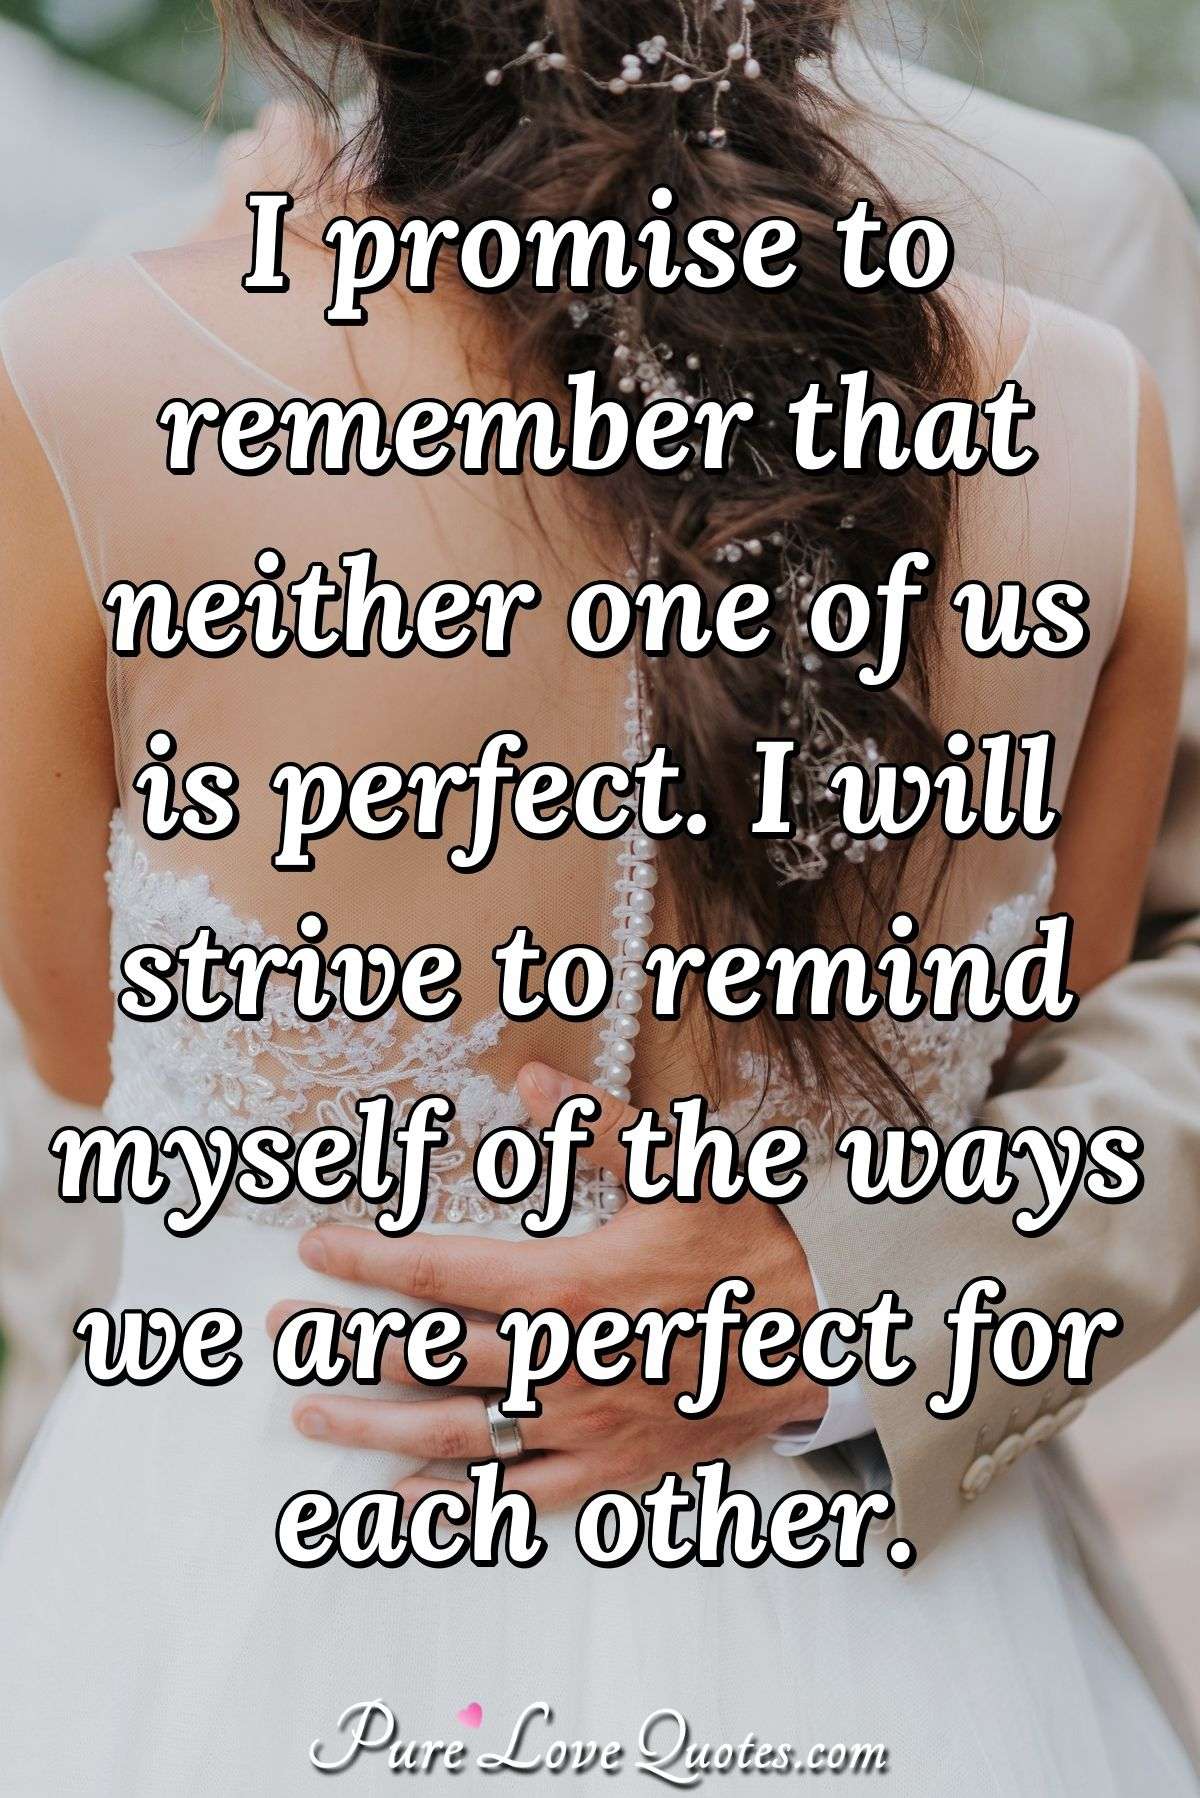 I promise to remember that neither one of us is perfect. I will strive to remind myself of the ways we are perfect for each other. - Anonymous